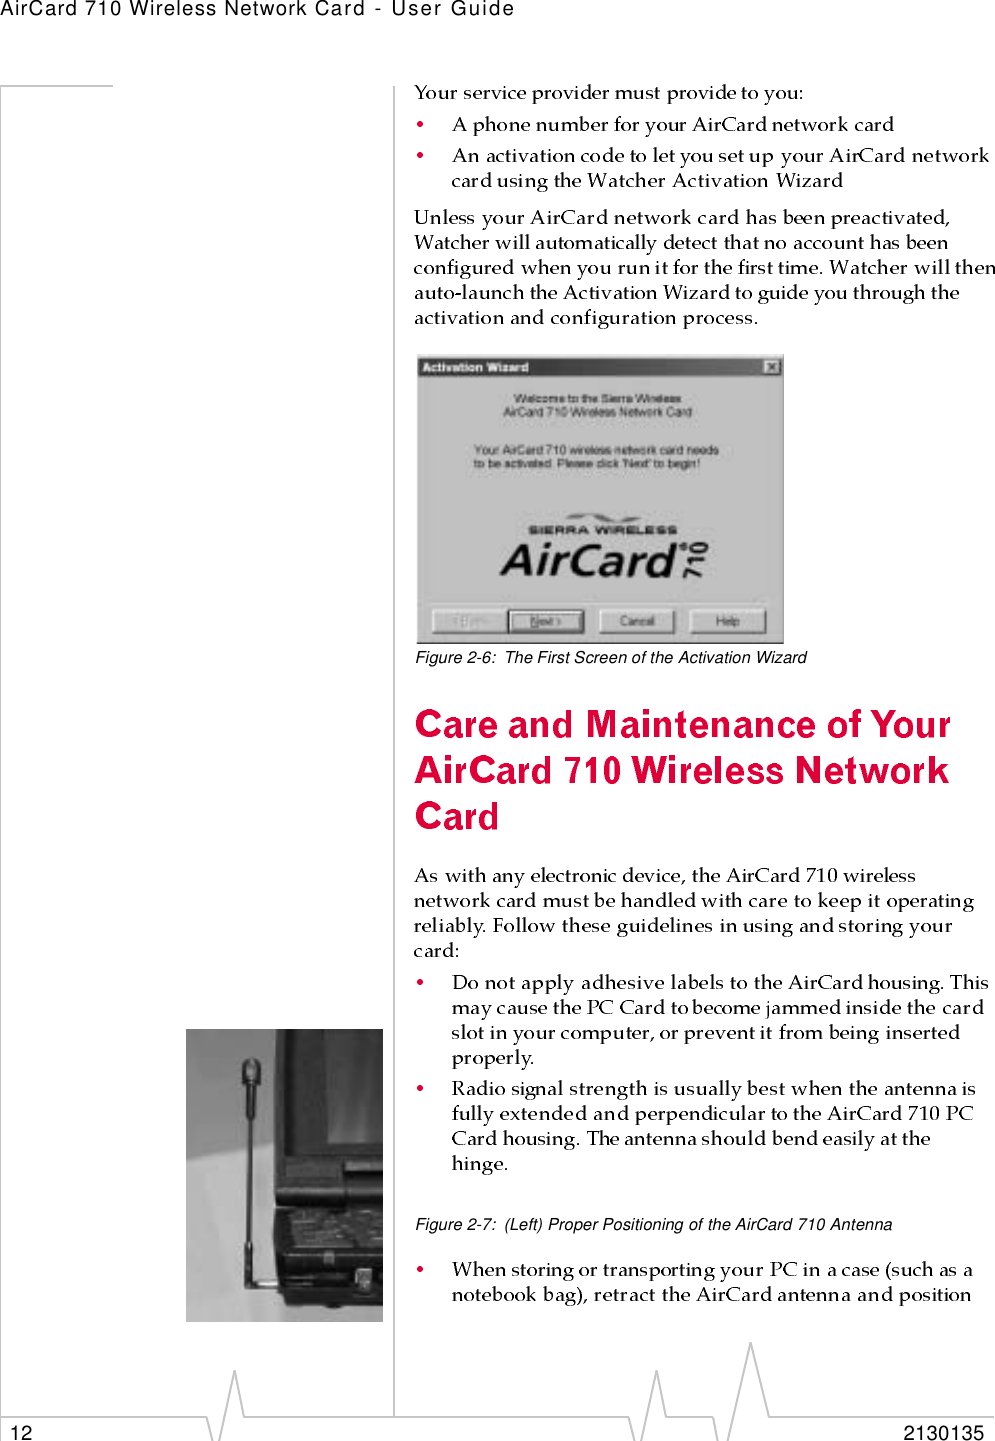 AirCard 710 Wireless Network Card - User Guide12 2130135Figure 2-6: The First Screen of the Activation WizardFigure 2-7: (Left) Proper Positioning of the AirCard 710 Antenna